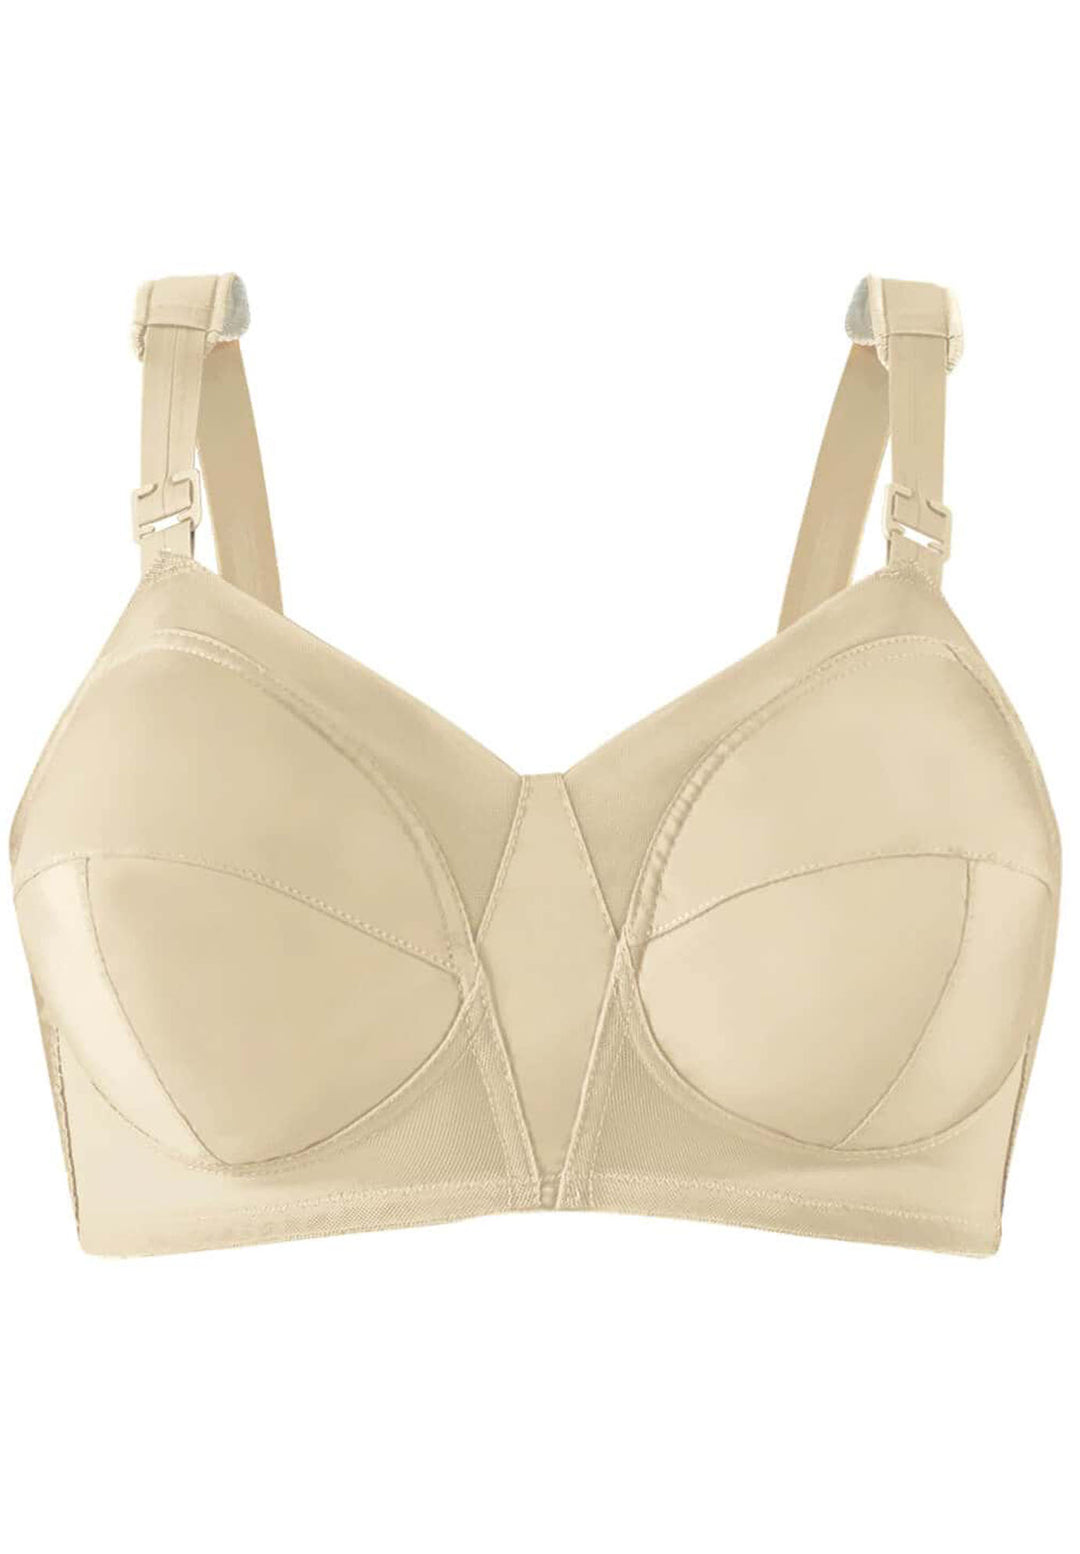 Exquisite Form Fully Front Close Lace Posture Bra White/Rose Beige 36B/40B/42B